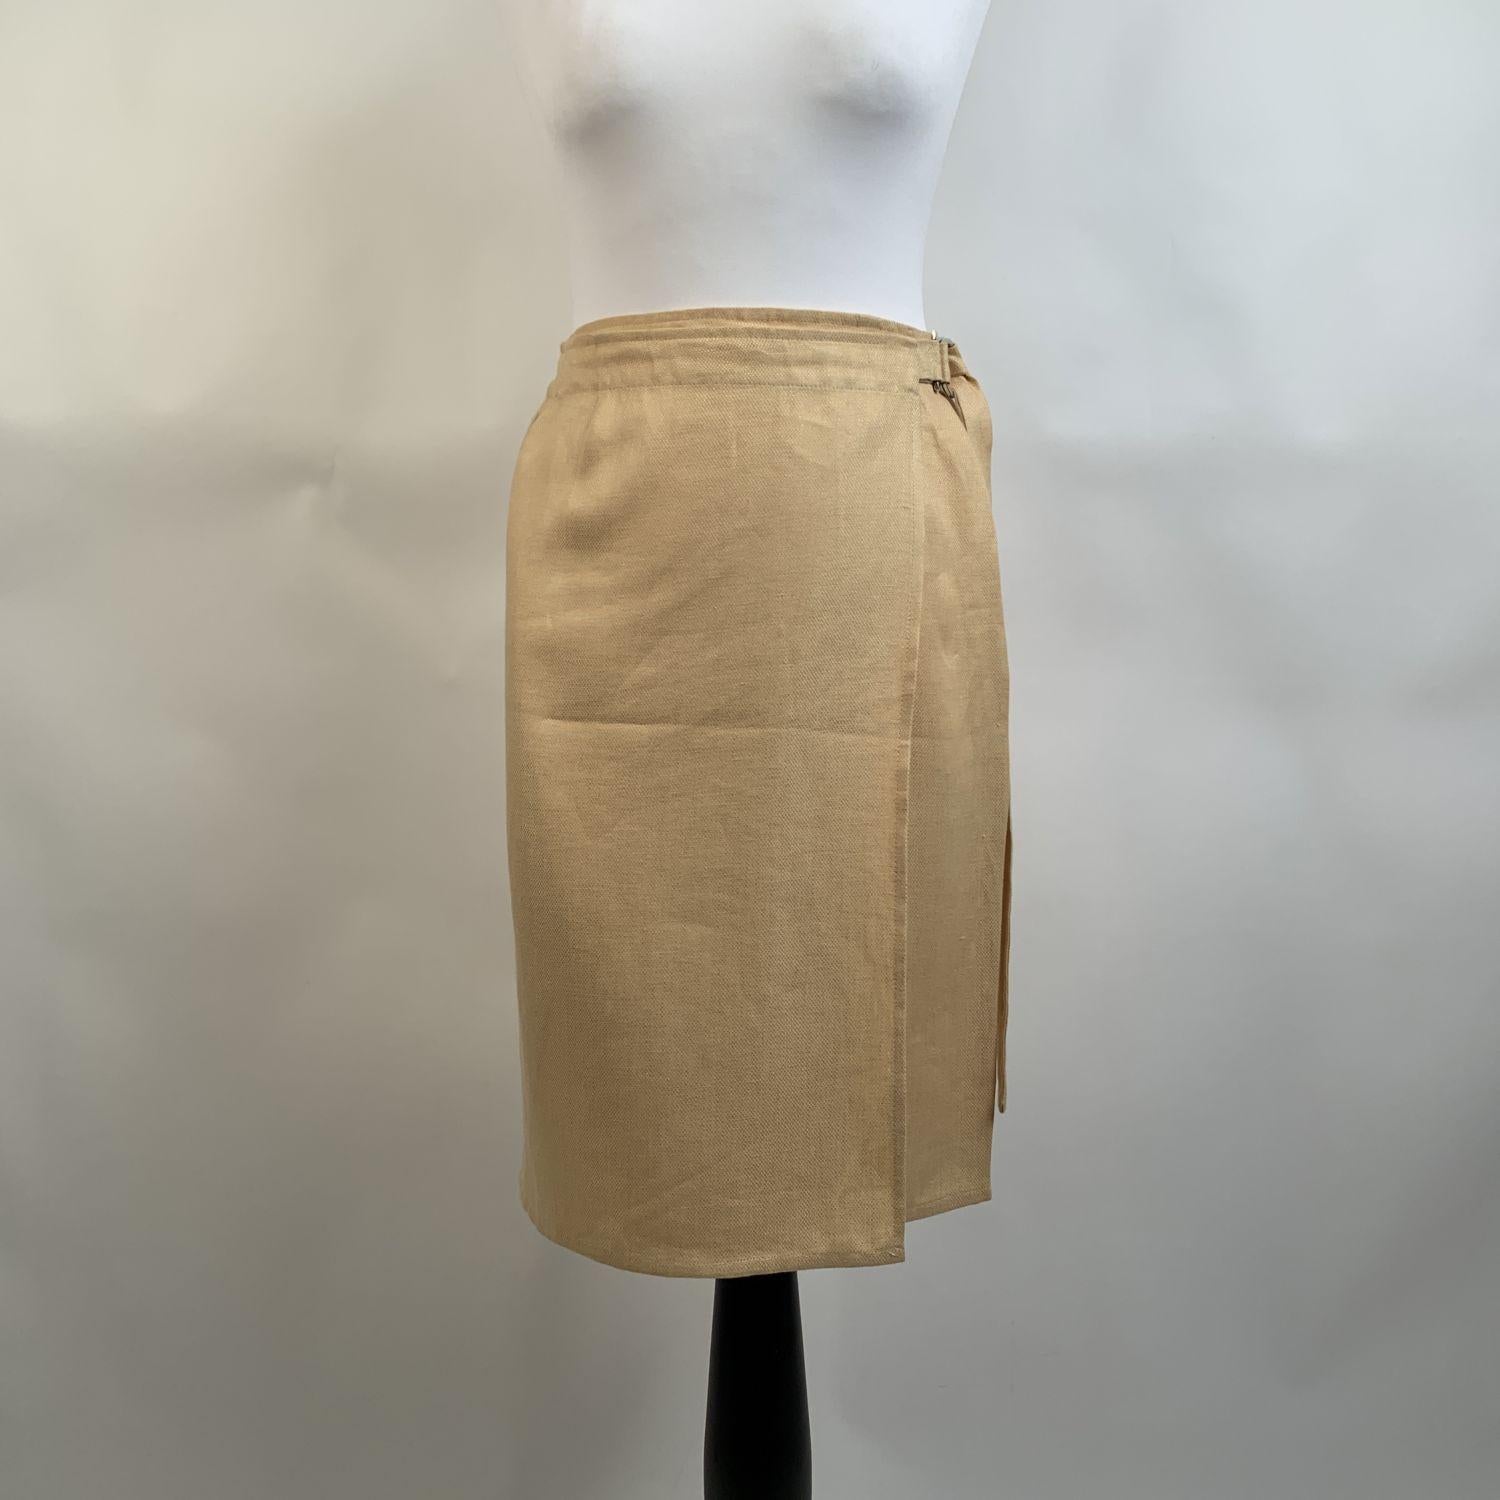 Salvatore Ferragamo vintage wrap skirt with pencil design. The skirt closes with an adjustable strap. Composition: 65% Linen, 35% Silk. Color / Effect: Beige. Size: 44 IT, 10 USA, 40 F, 40 D (it should correspond to a MEDIUM